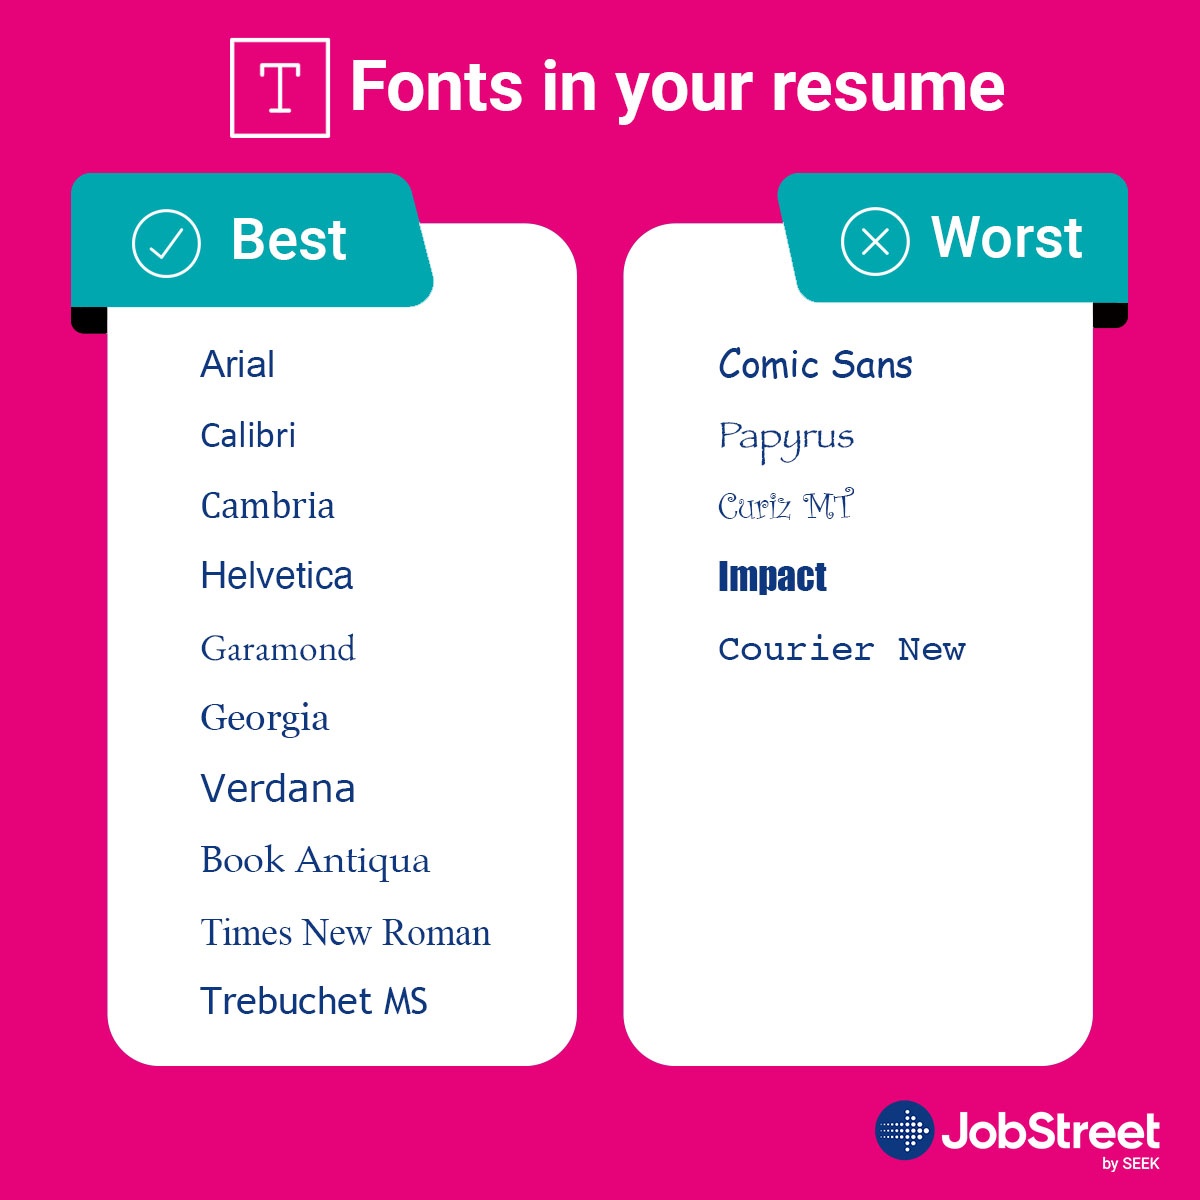 Fonts in your resume